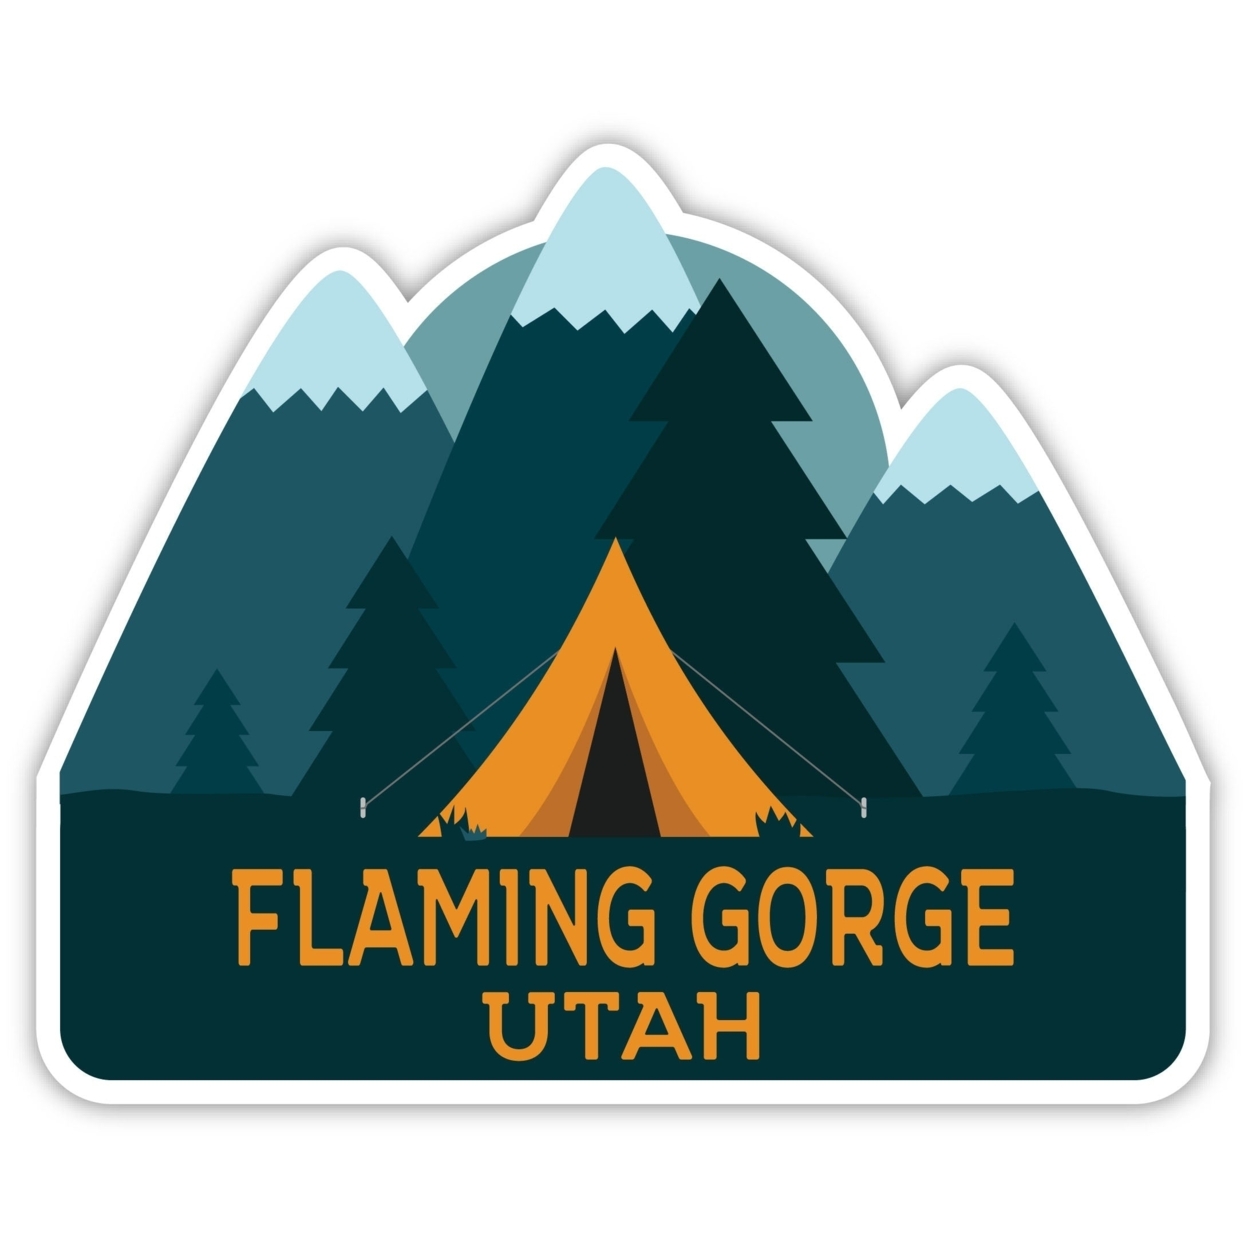 Flaming Gorge Utah Souvenir Decorative Stickers (Choose Theme And Size) - 4-Pack, 6-Inch, Adventures Awaits